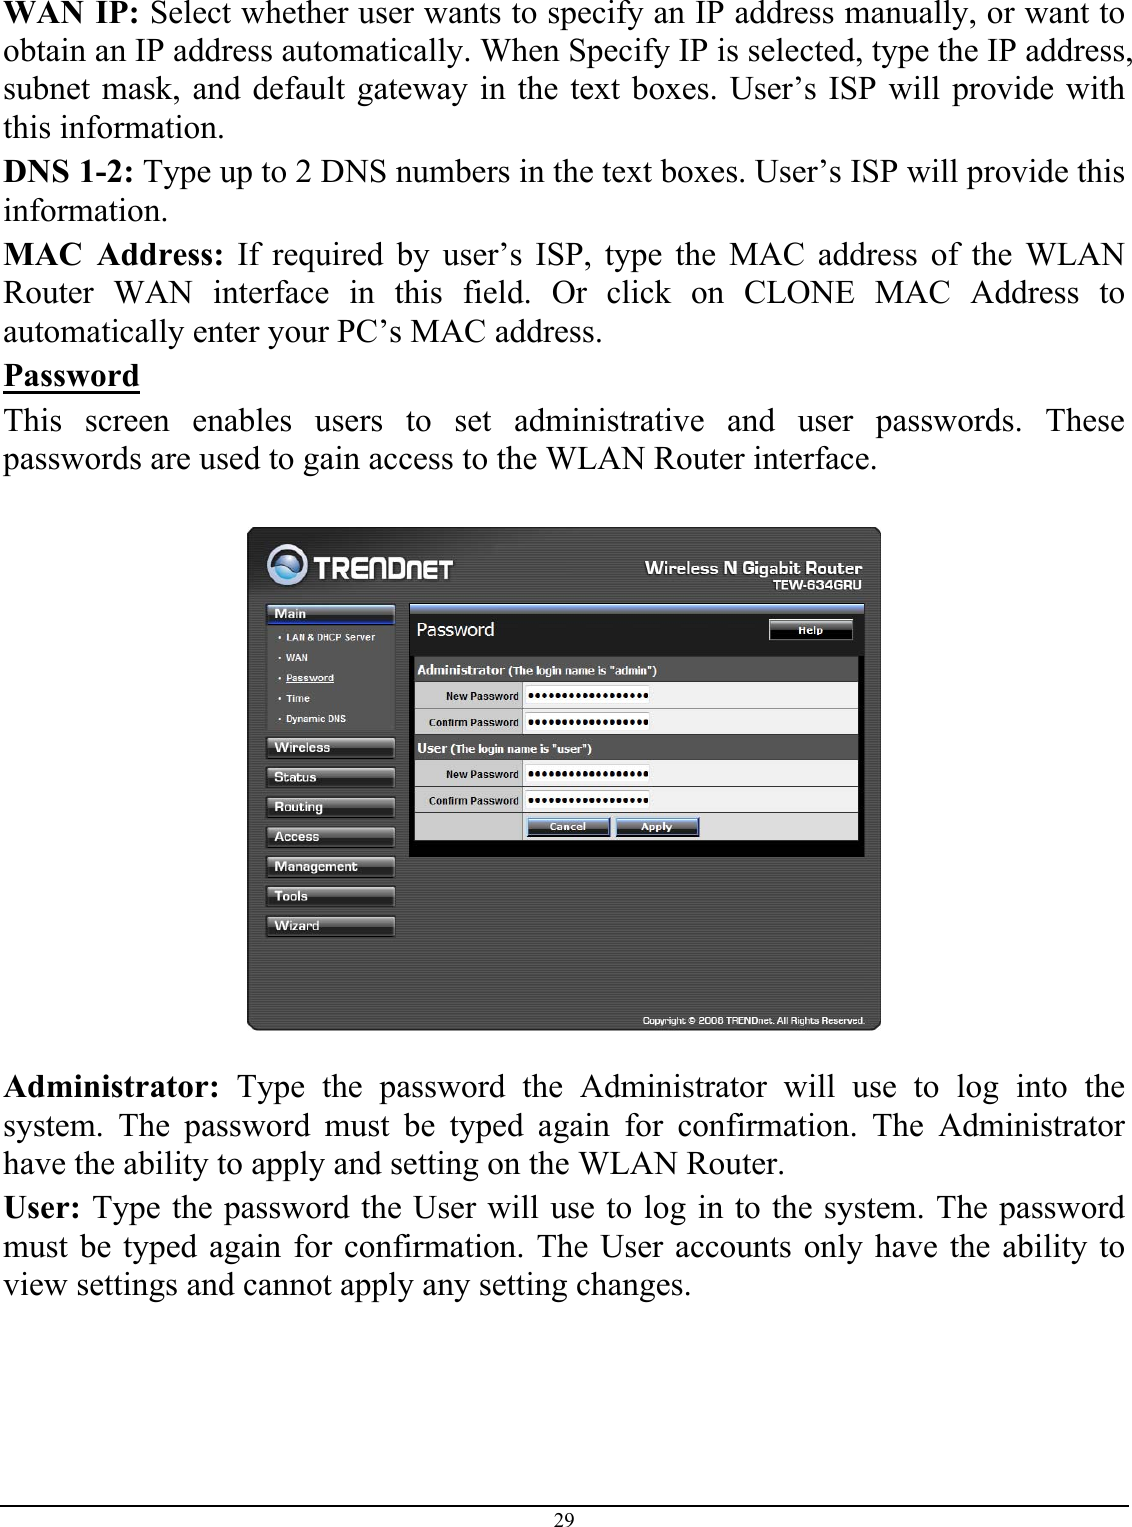 29  WAN IP: Select whether user wants to specify an IP address manually, or want to obtain an IP address automatically. When Specify IP is selected, type the IP address, subnet mask, and default gateway in the text boxes. User’s ISP will provide with this information. DNS 1-2: Type up to 2 DNS numbers in the text boxes. User’s ISP will provide this information. MAC Address: If required by user’s ISP, type the MAC address of the WLAN Router WAN interface in this field. Or click on CLONE MAC Address to automatically enter your PC’s MAC address.  Password This screen enables users to set administrative and user passwords. These passwords are used to gain access to the WLAN Router interface.    Administrator: Type the password the Administrator will use to log into the system. The password must be typed again for confirmation. The Administrator have the ability to apply and setting on the WLAN Router. User: Type the password the User will use to log in to the system. The password must be typed again for confirmation. The User accounts only have the ability to view settings and cannot apply any setting changes.  